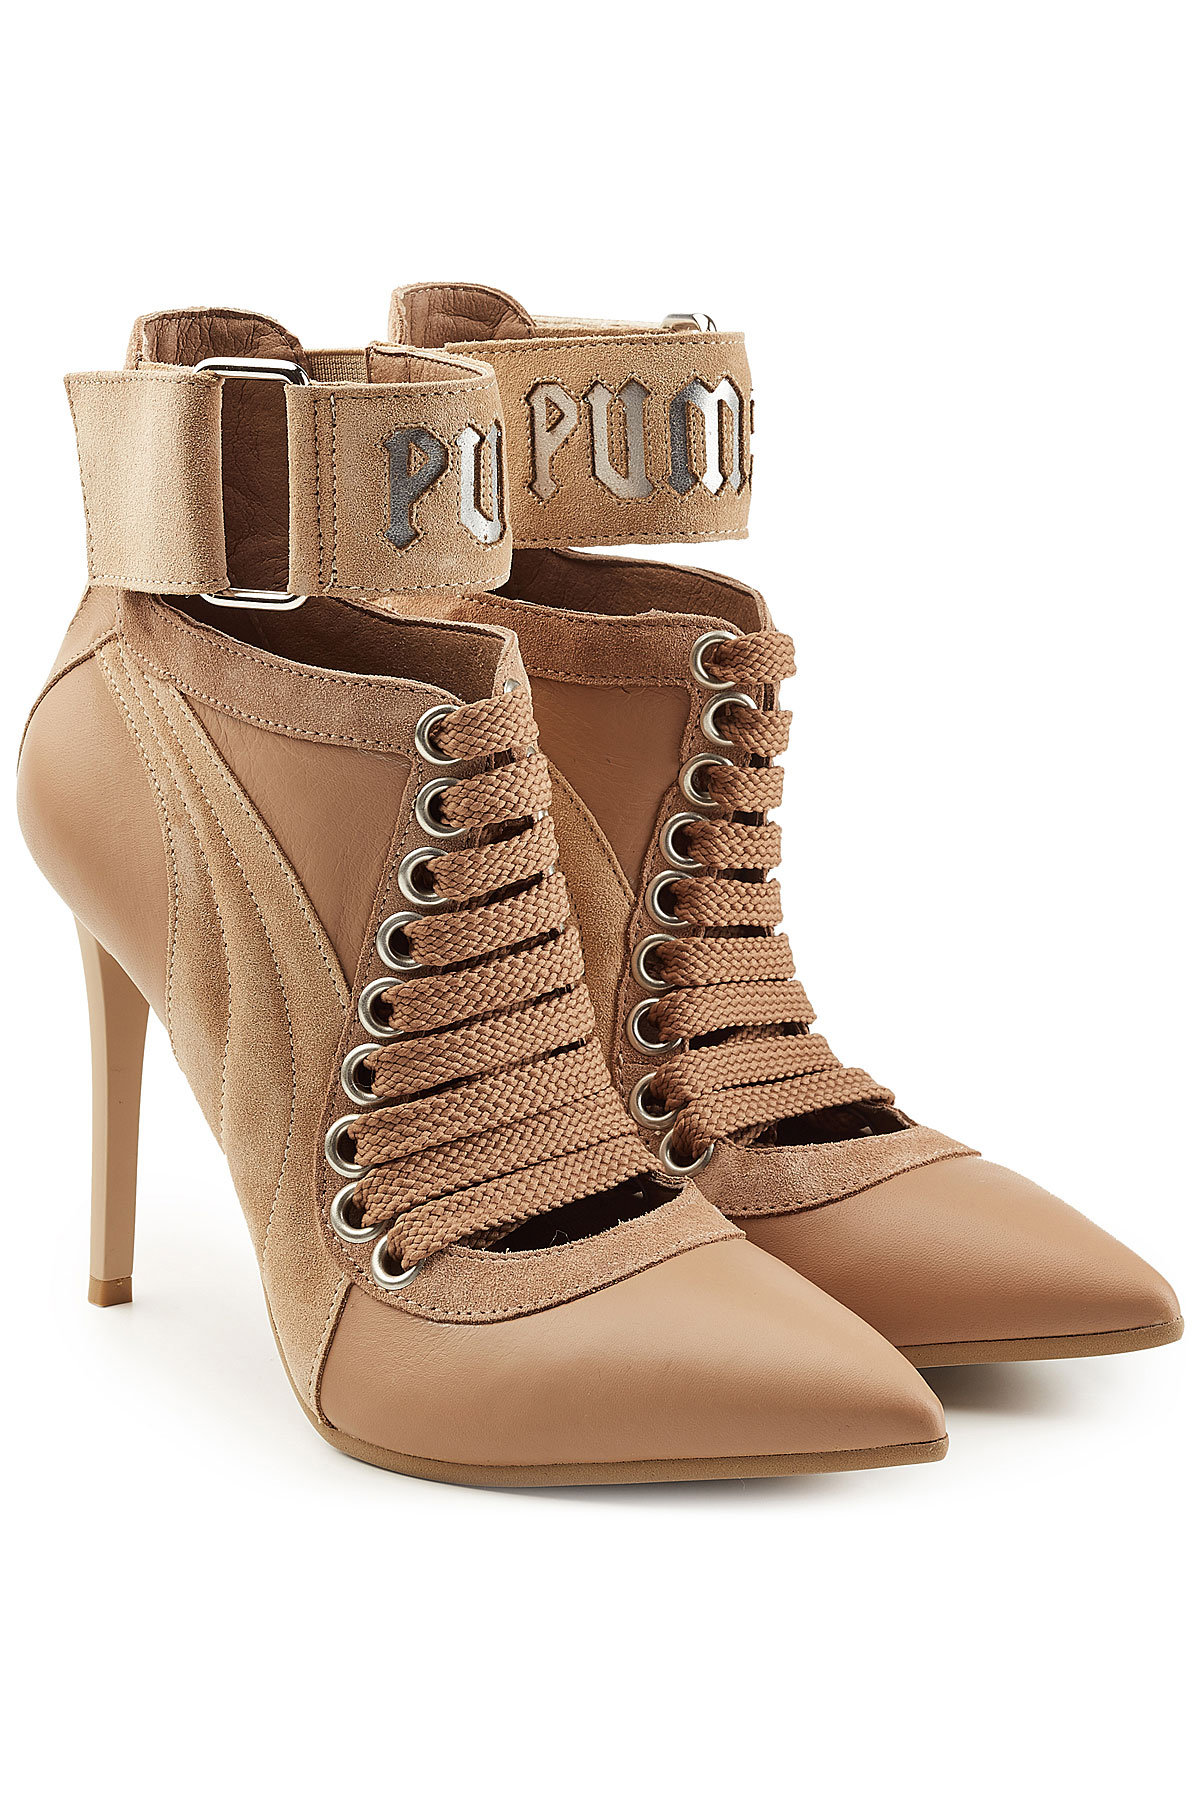 FENTY Puma by Rihanna - Lace Up Stiletto Boots with Leather and Suede